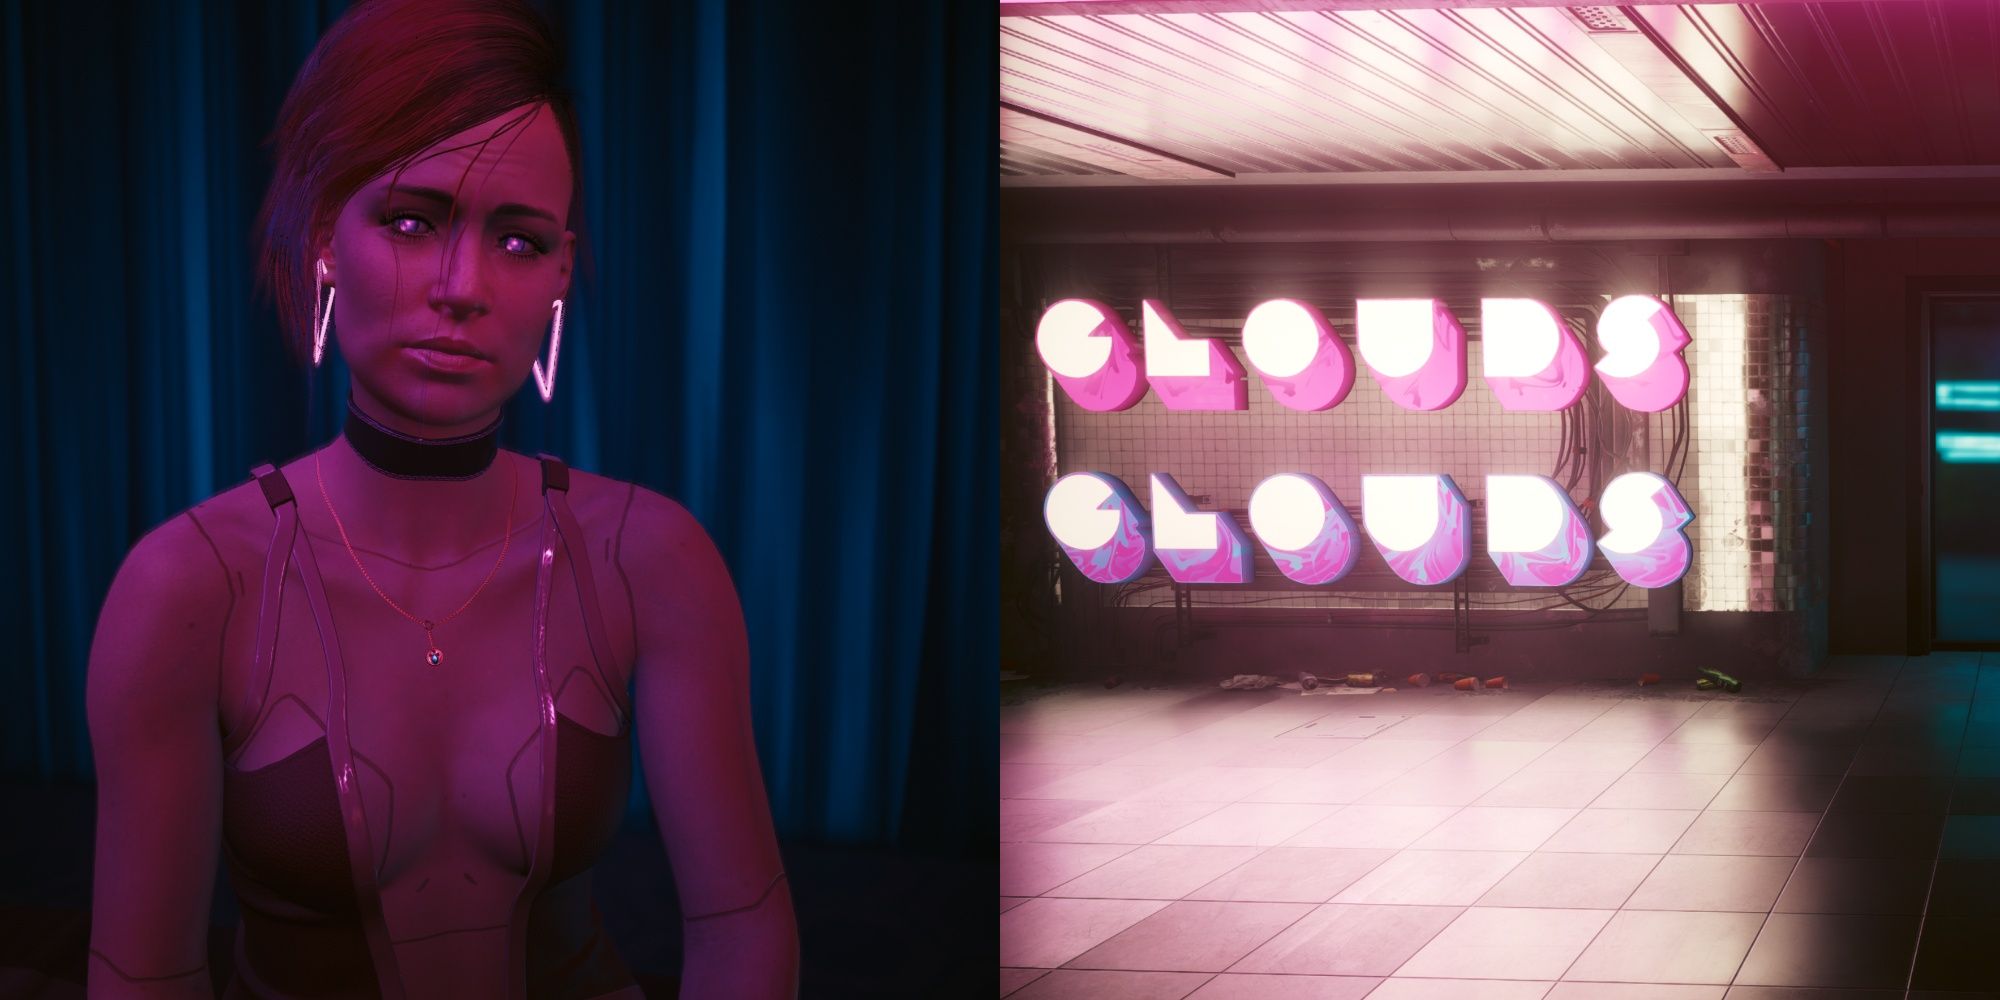 Collage image of a doll and the Clouds club in Cyberpunk 2077.